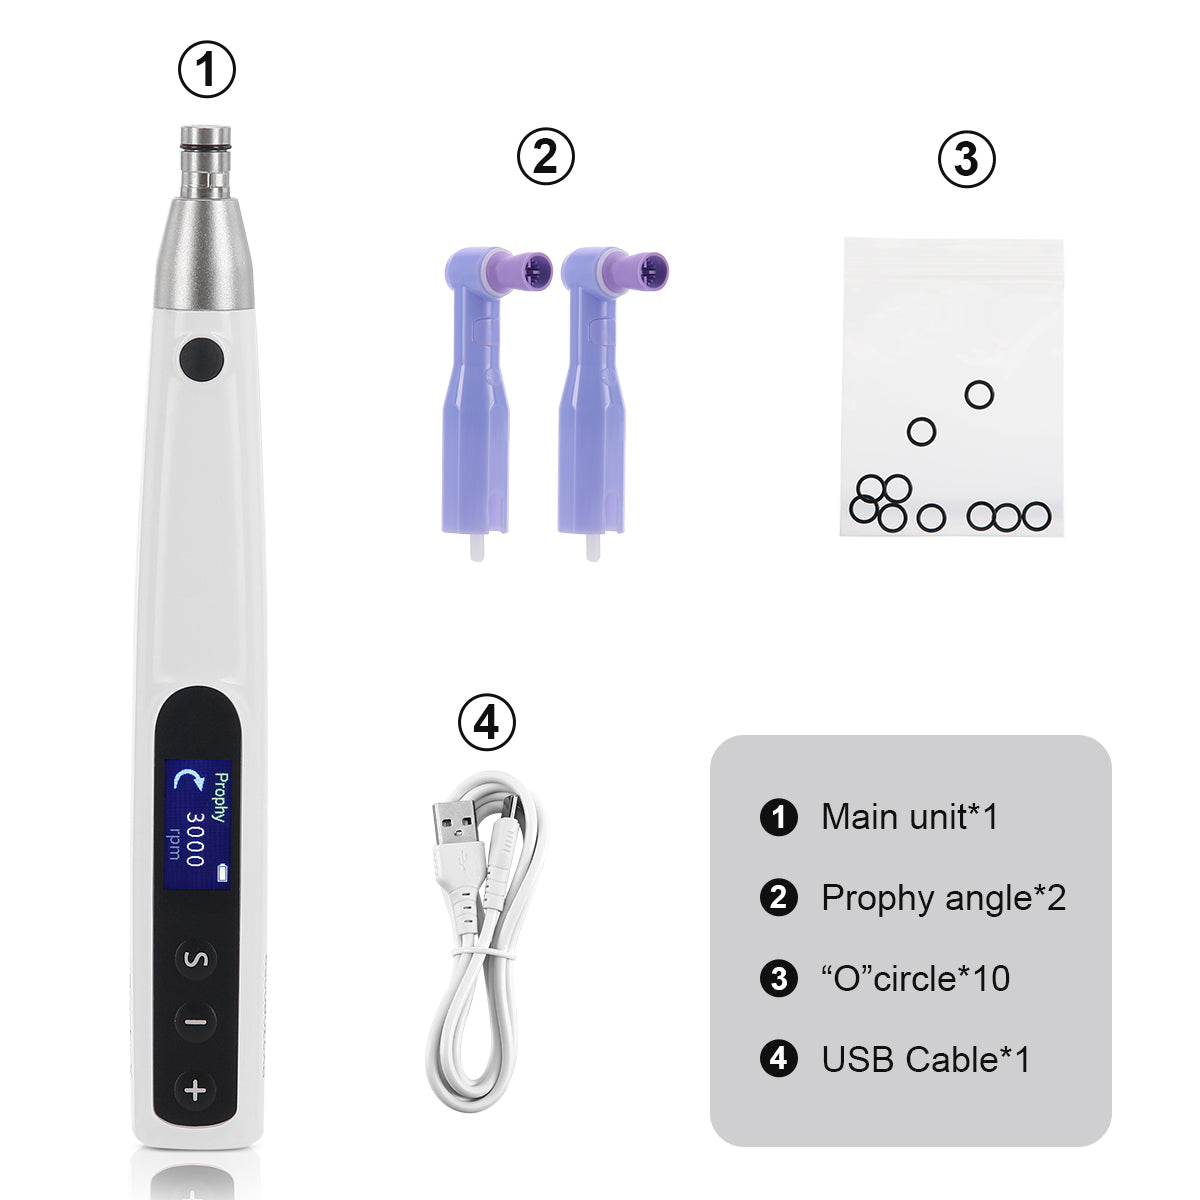 Cordless Hygiene Prophy Handpiece 360° Rotating 6 Speed Settings & 2 Prophy Angles - pairaydental.com